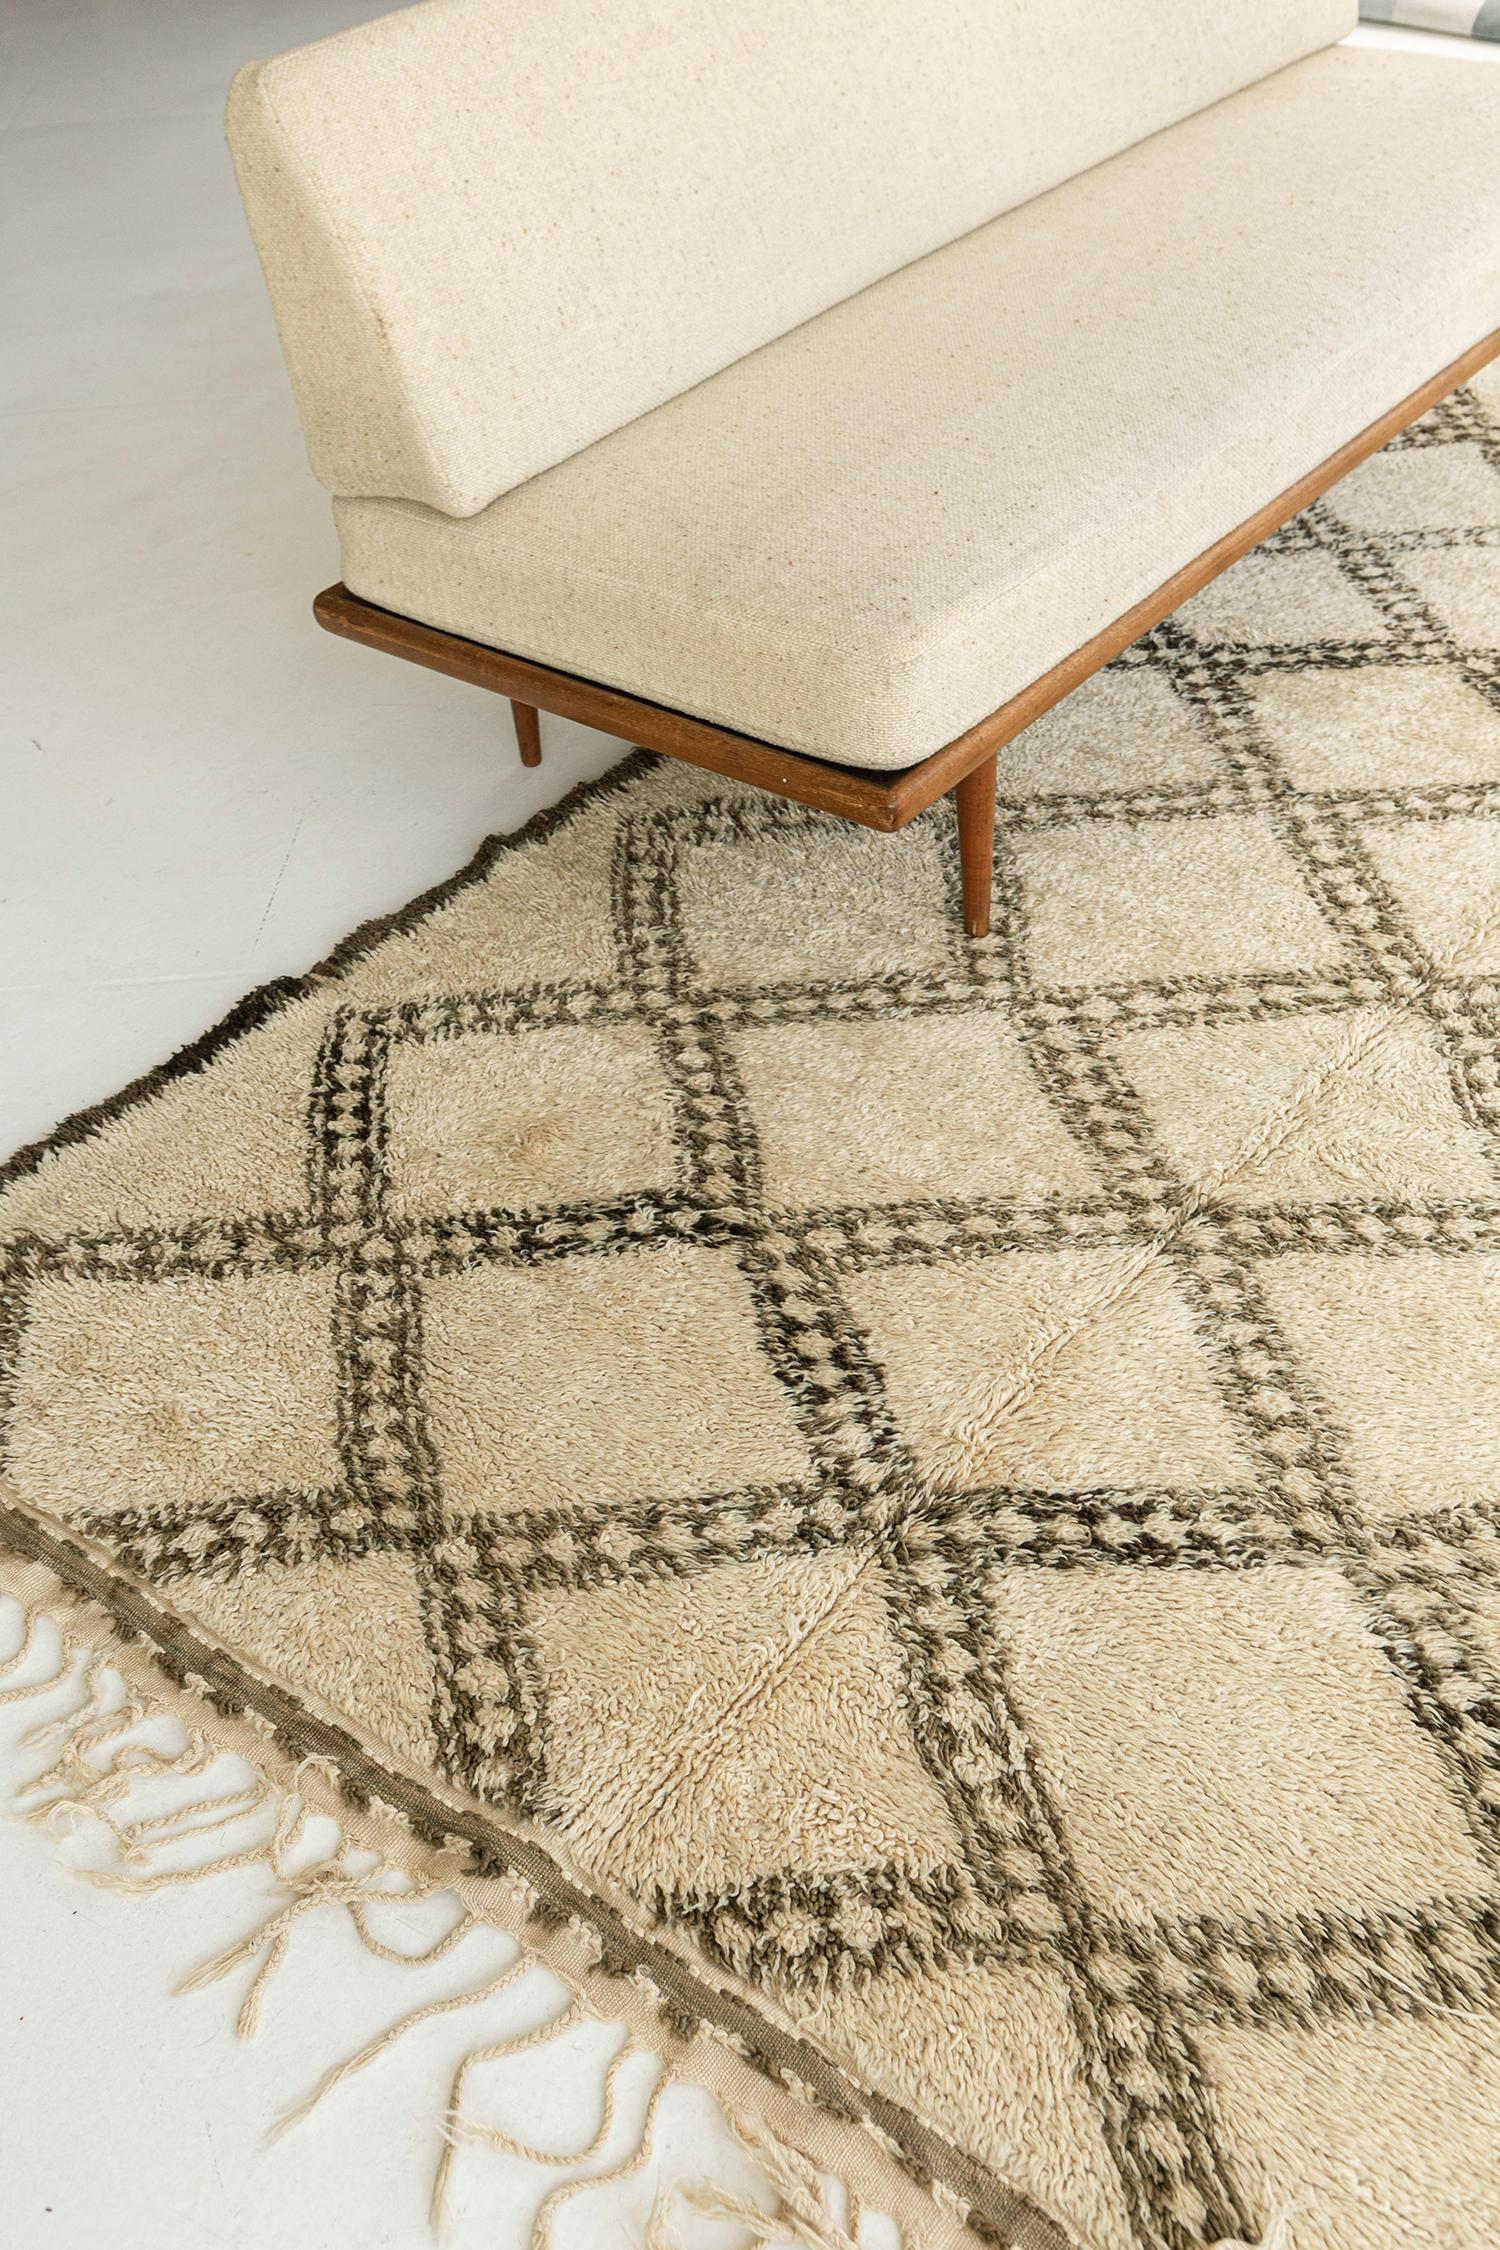 Let you eyes smize with our Classic and timeless Beni Ourain Moroccan rug from Atlas collection. Diamonds are aligned in clay lozenges with extended sides and formed an impressive design in an ivory. Checkered patterns are in both top and bottom to